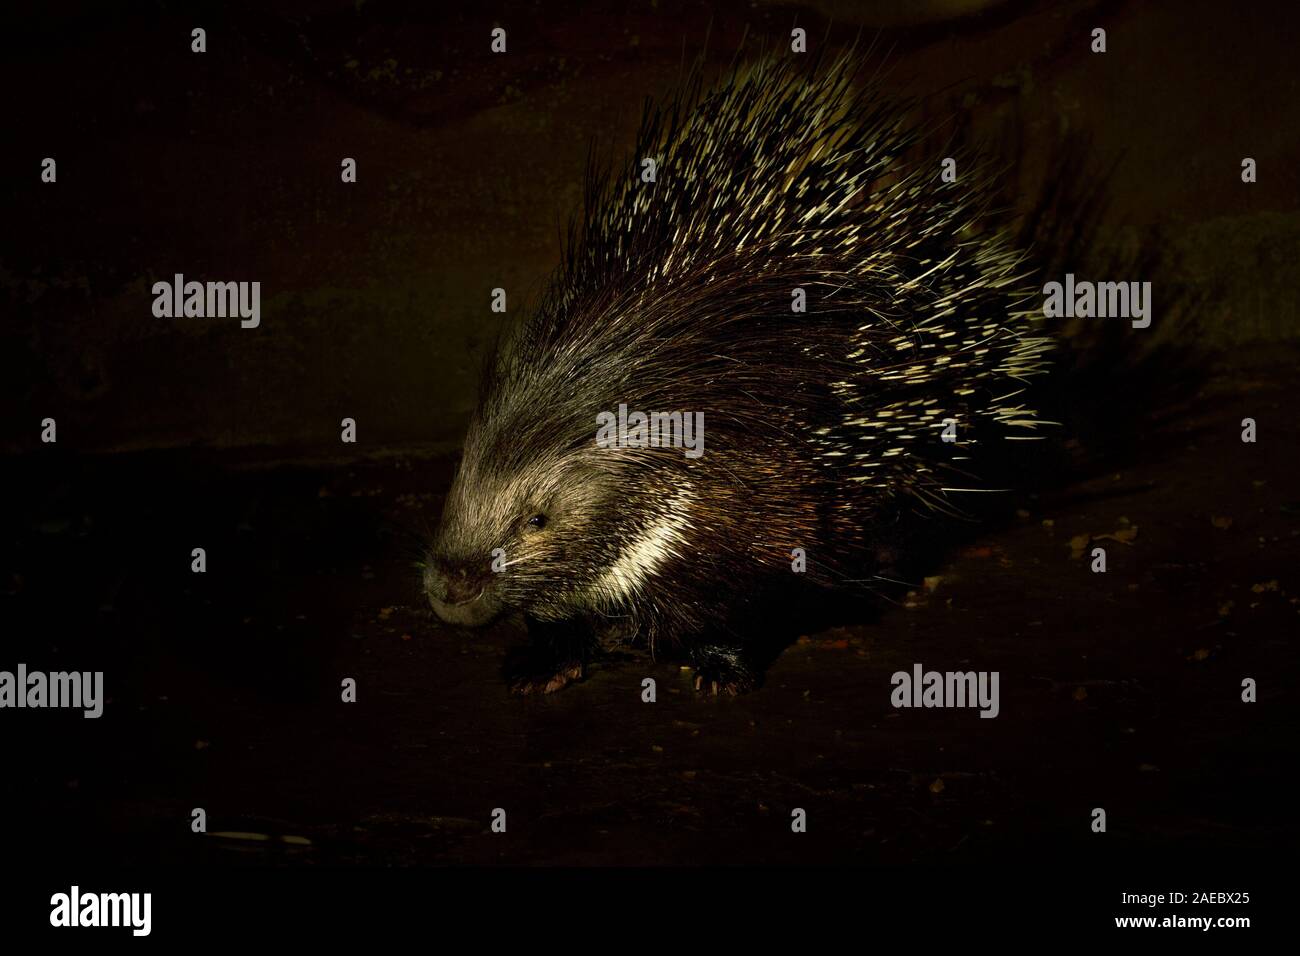 Yong Indian Crested Porcupine (Hystrix indica), or Indian Porcupine is a rodent, found throughout southern Asia and the Middle East. Photographed at n Stock Photo